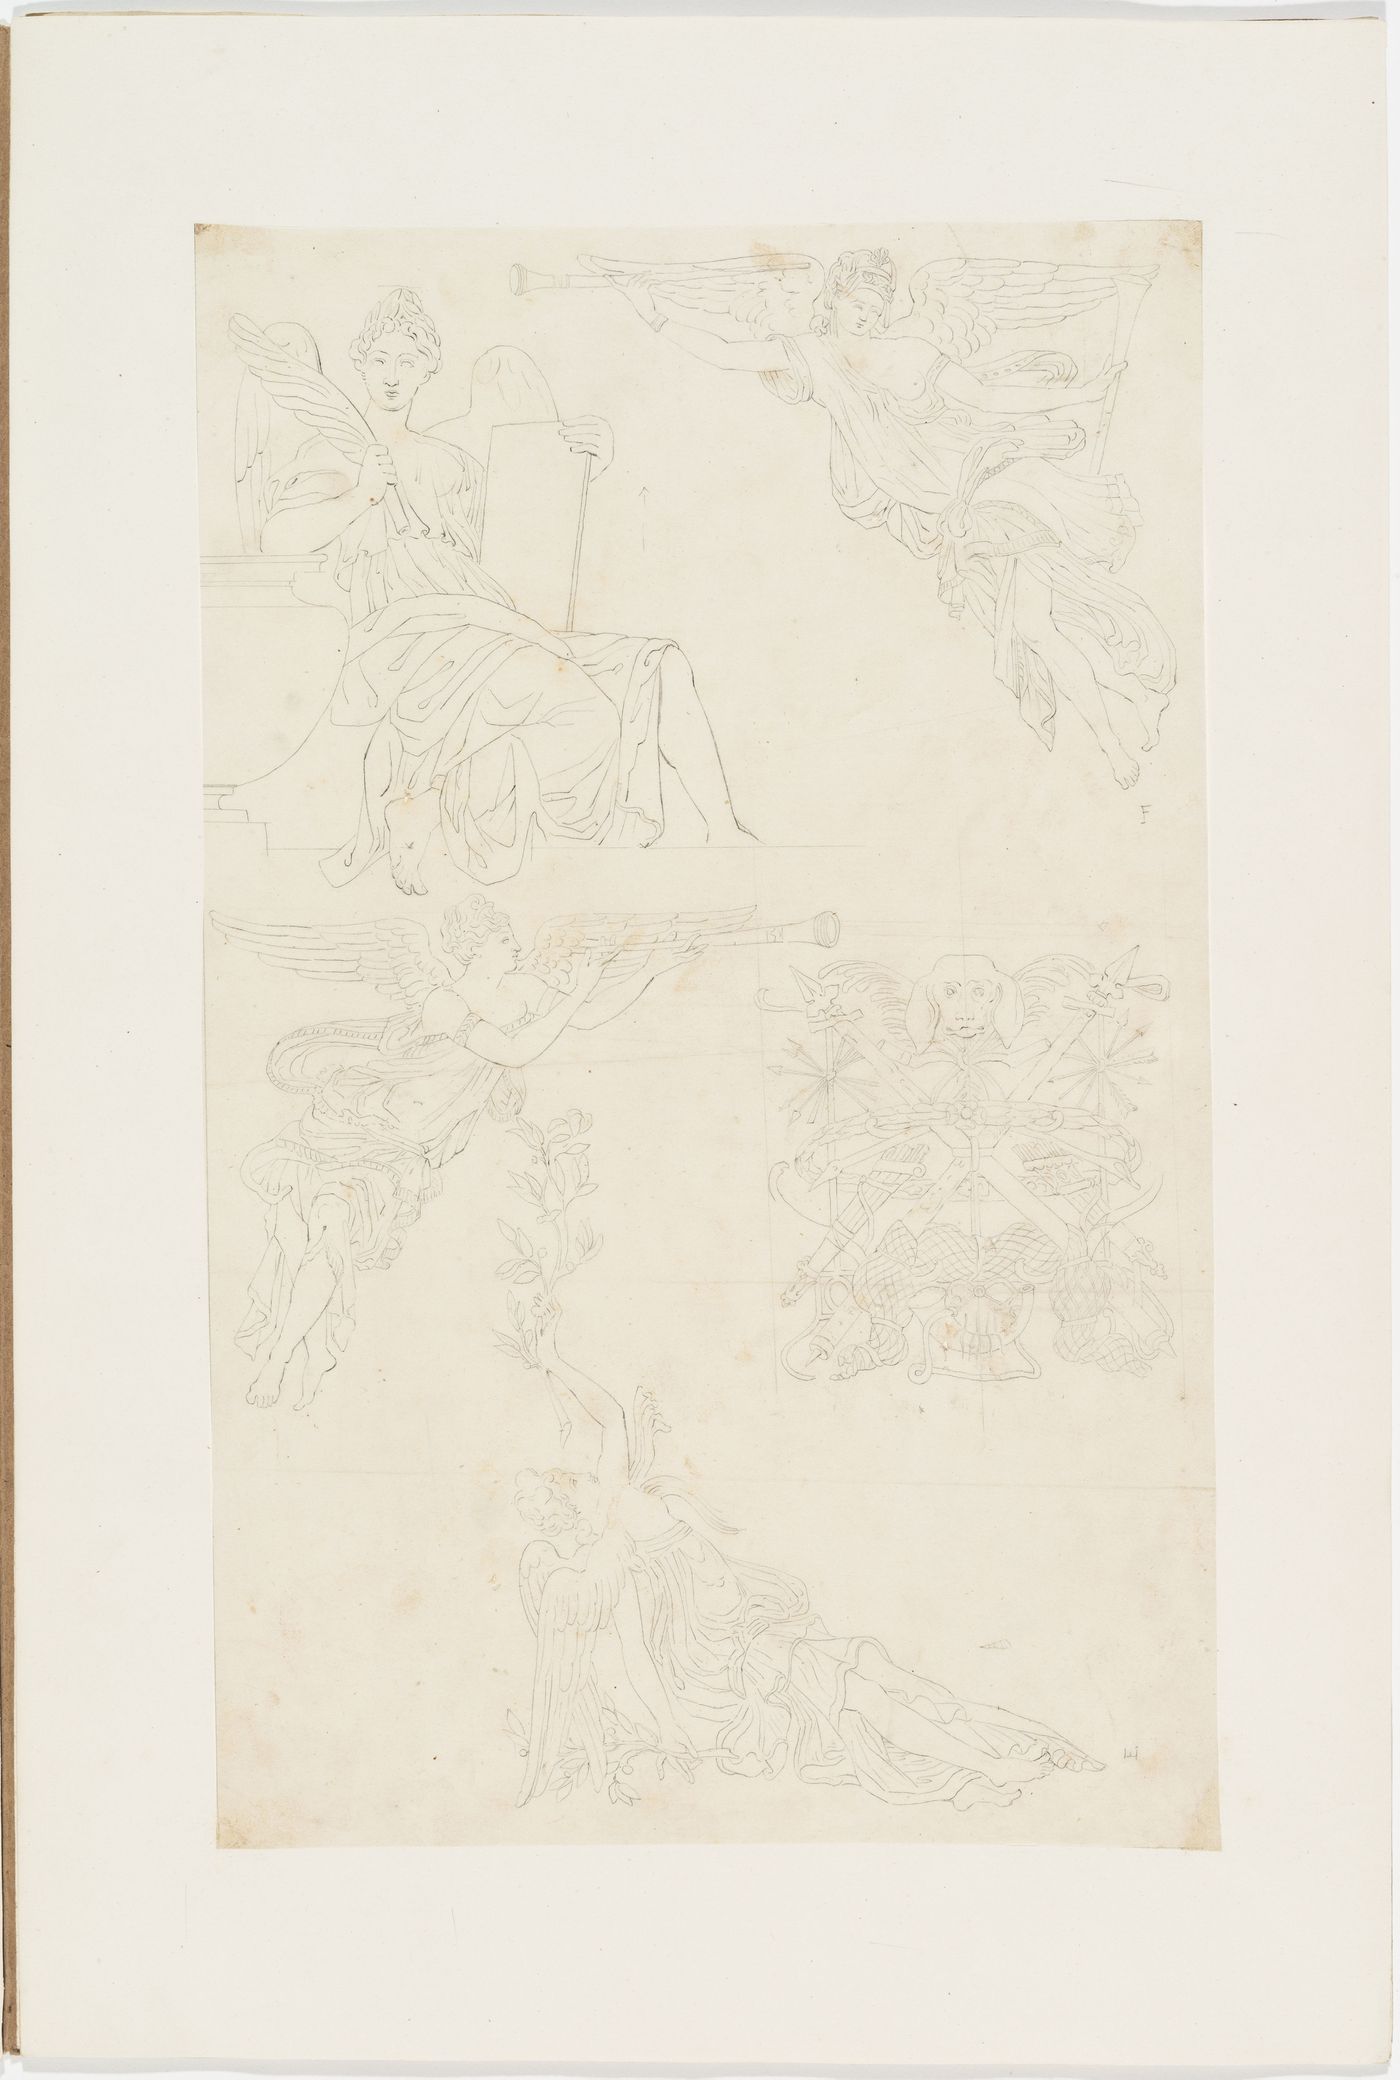 Four drawings of winged female figures, probably Victories, and one trophy